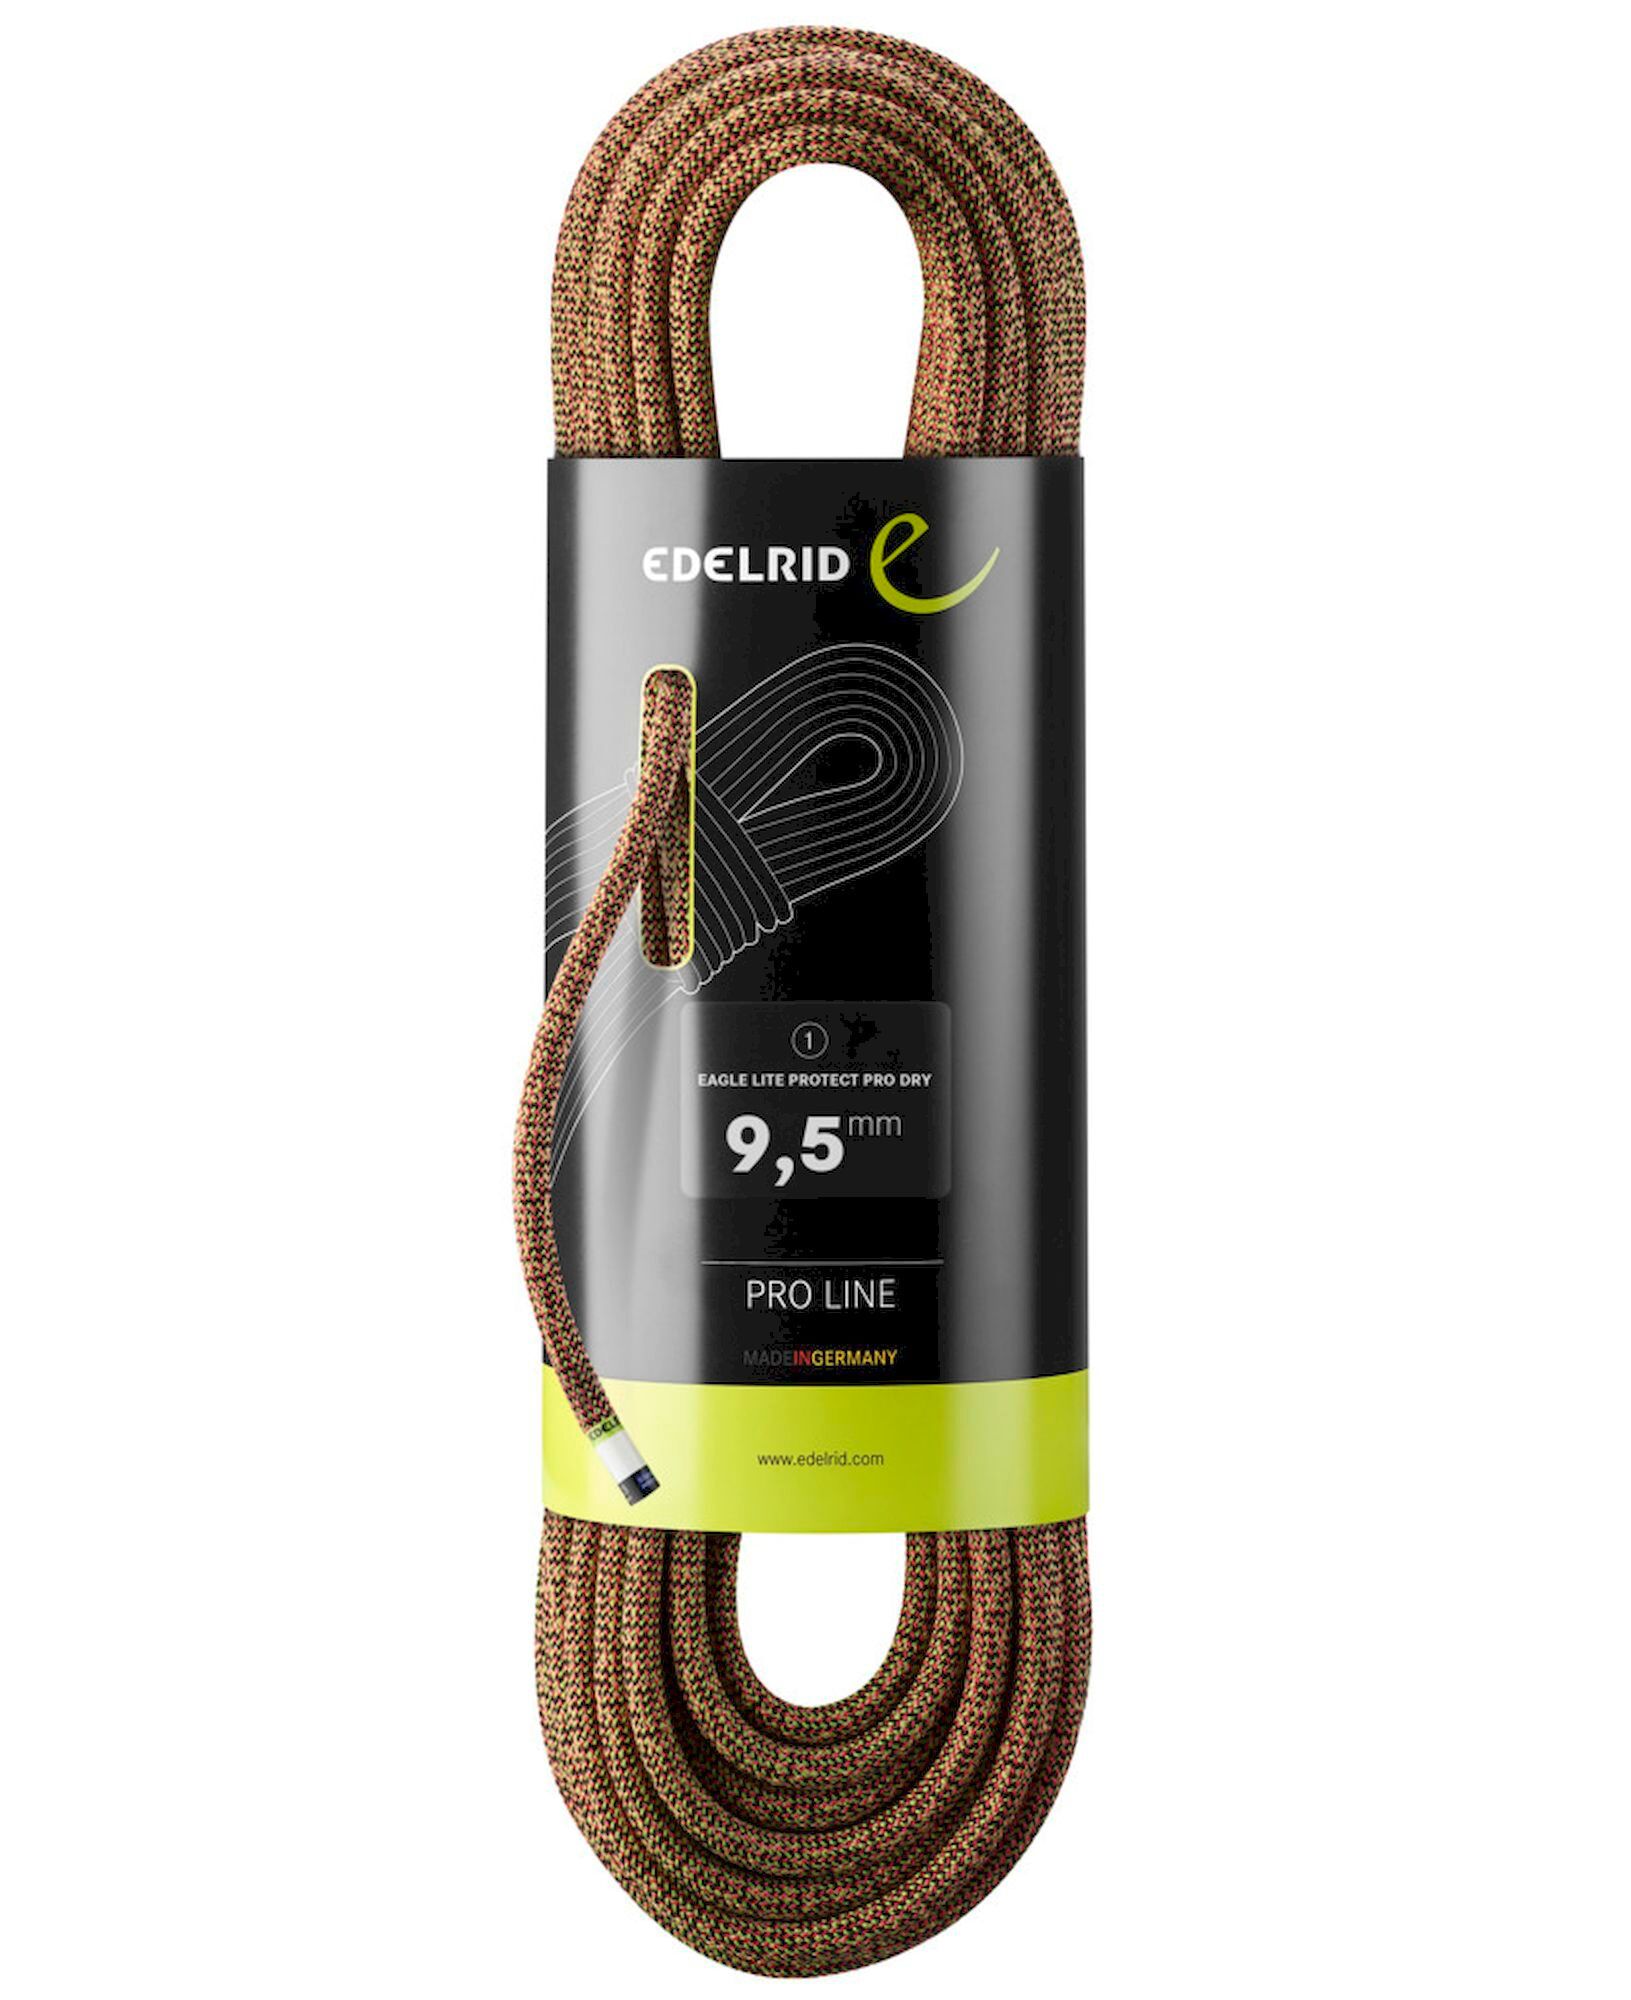 Edelrid Eagle Lite Protect Pro Dry 9,5 mm - Lina wspinaczkowa | Hardloop